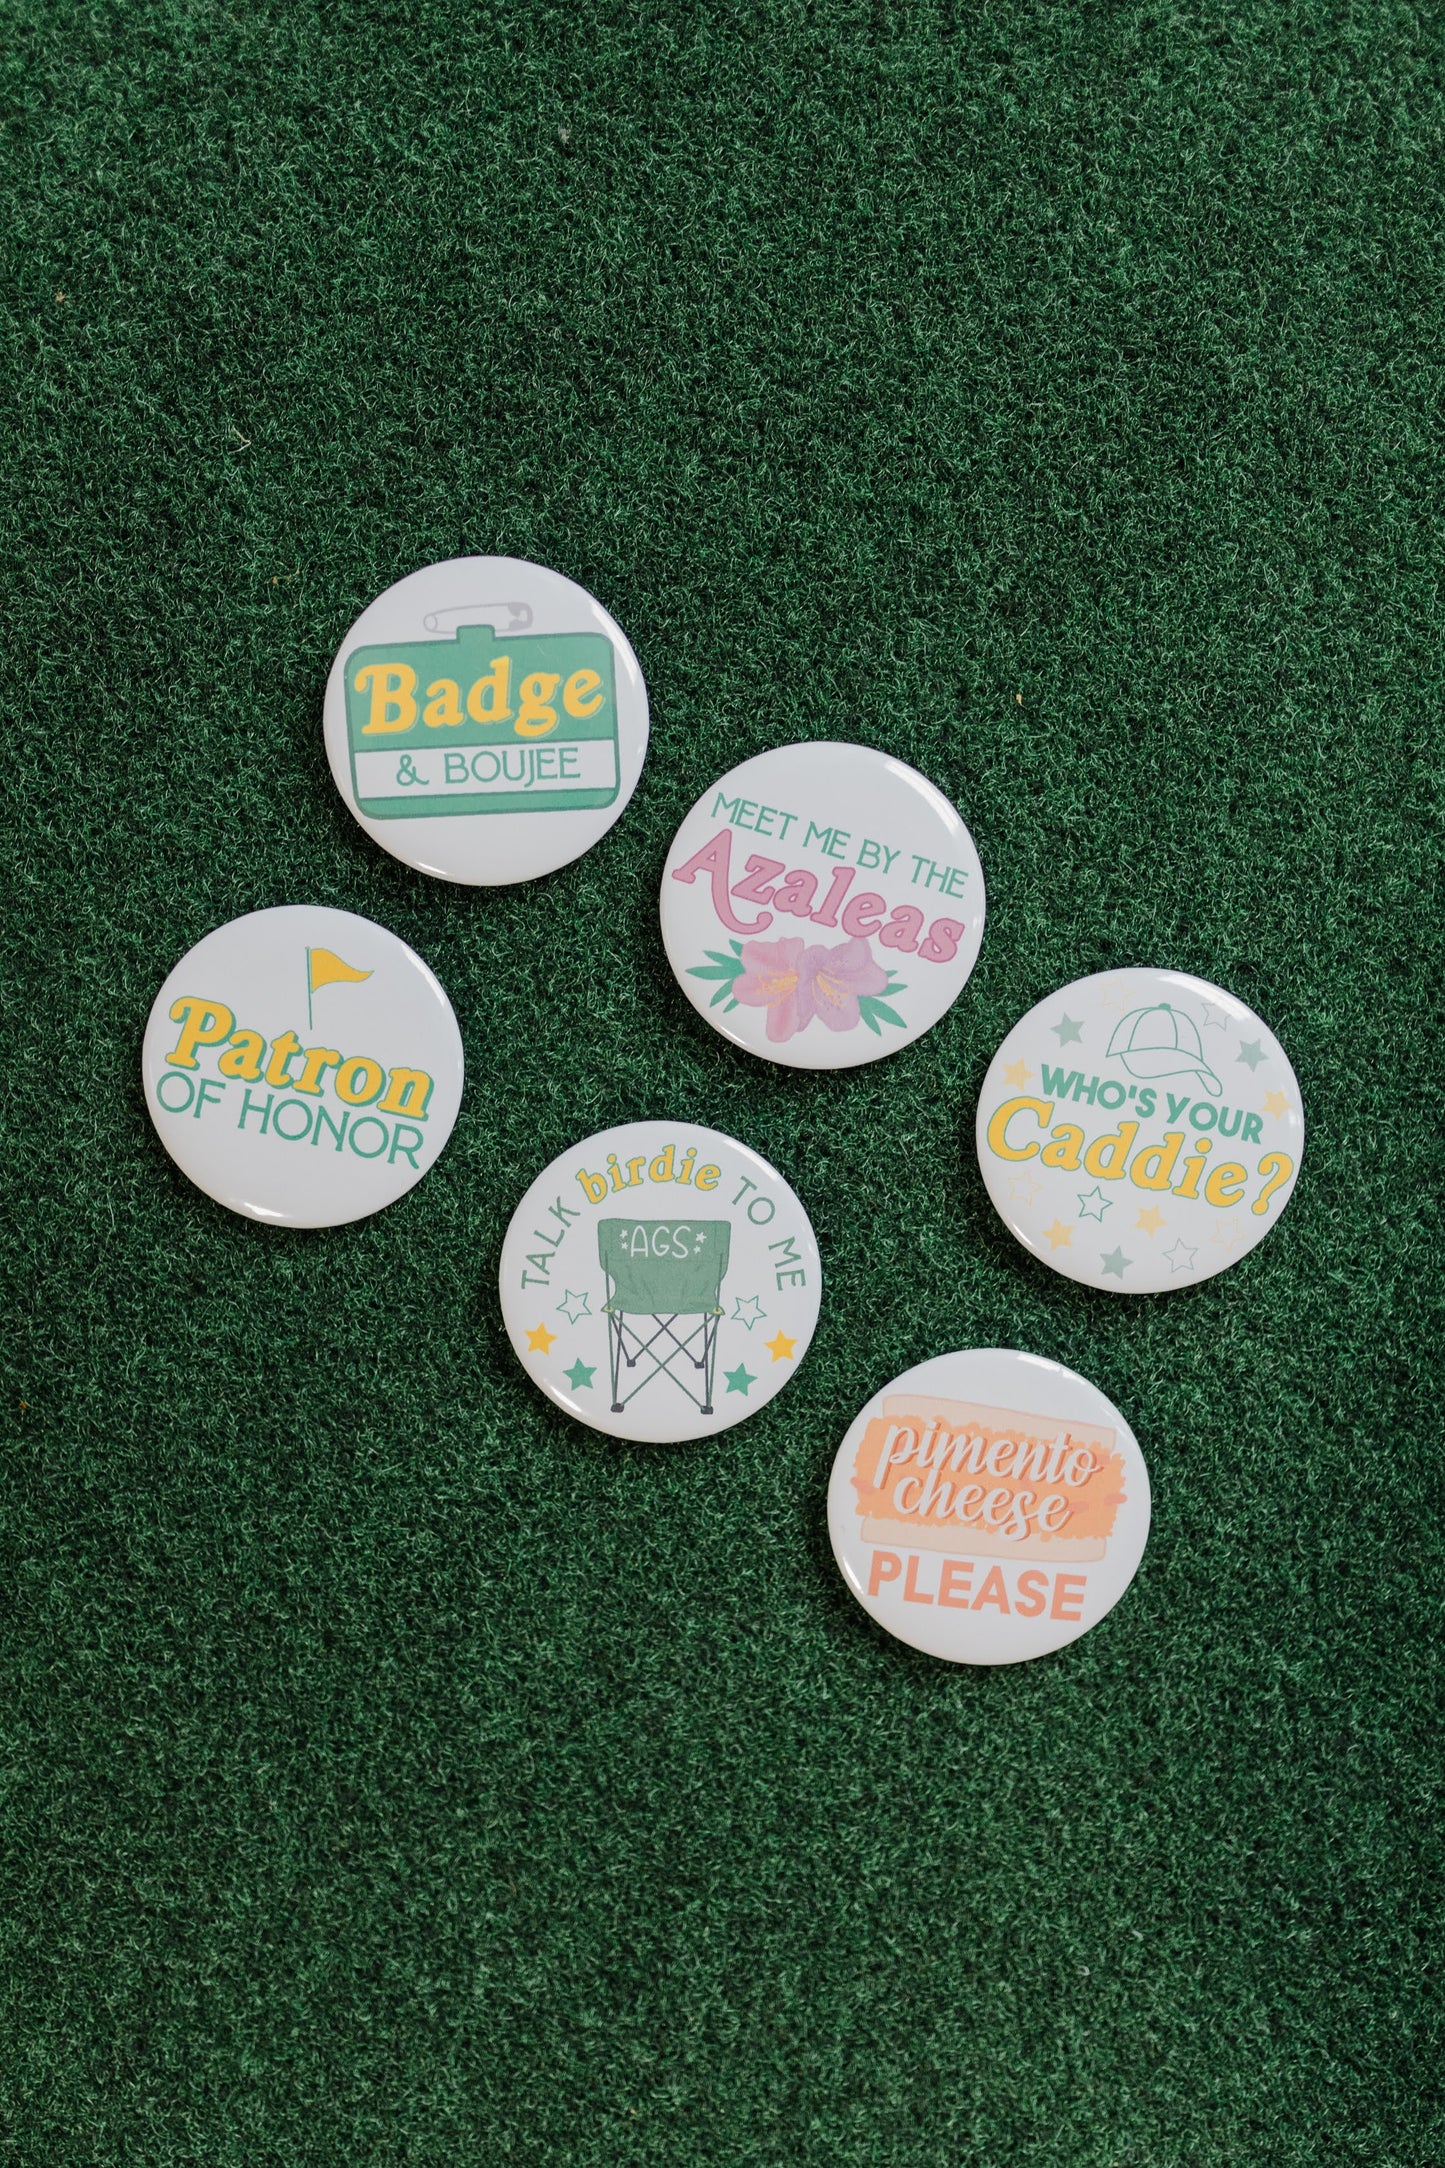 Locally Made Golf Buttons